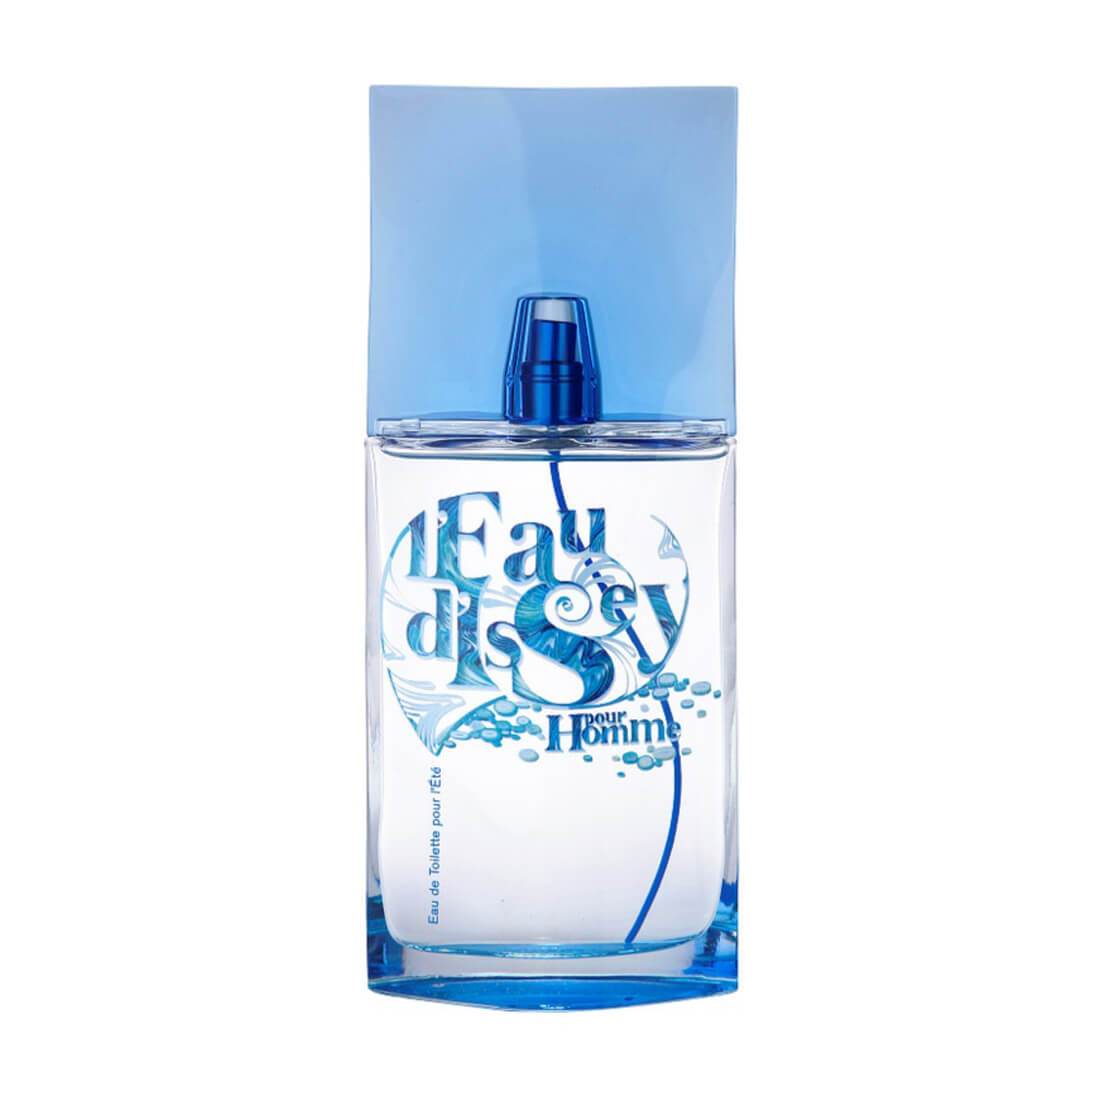 Issey Miyake Summer 2015 Pour L'ete EDT Perfume For Men - 125ml